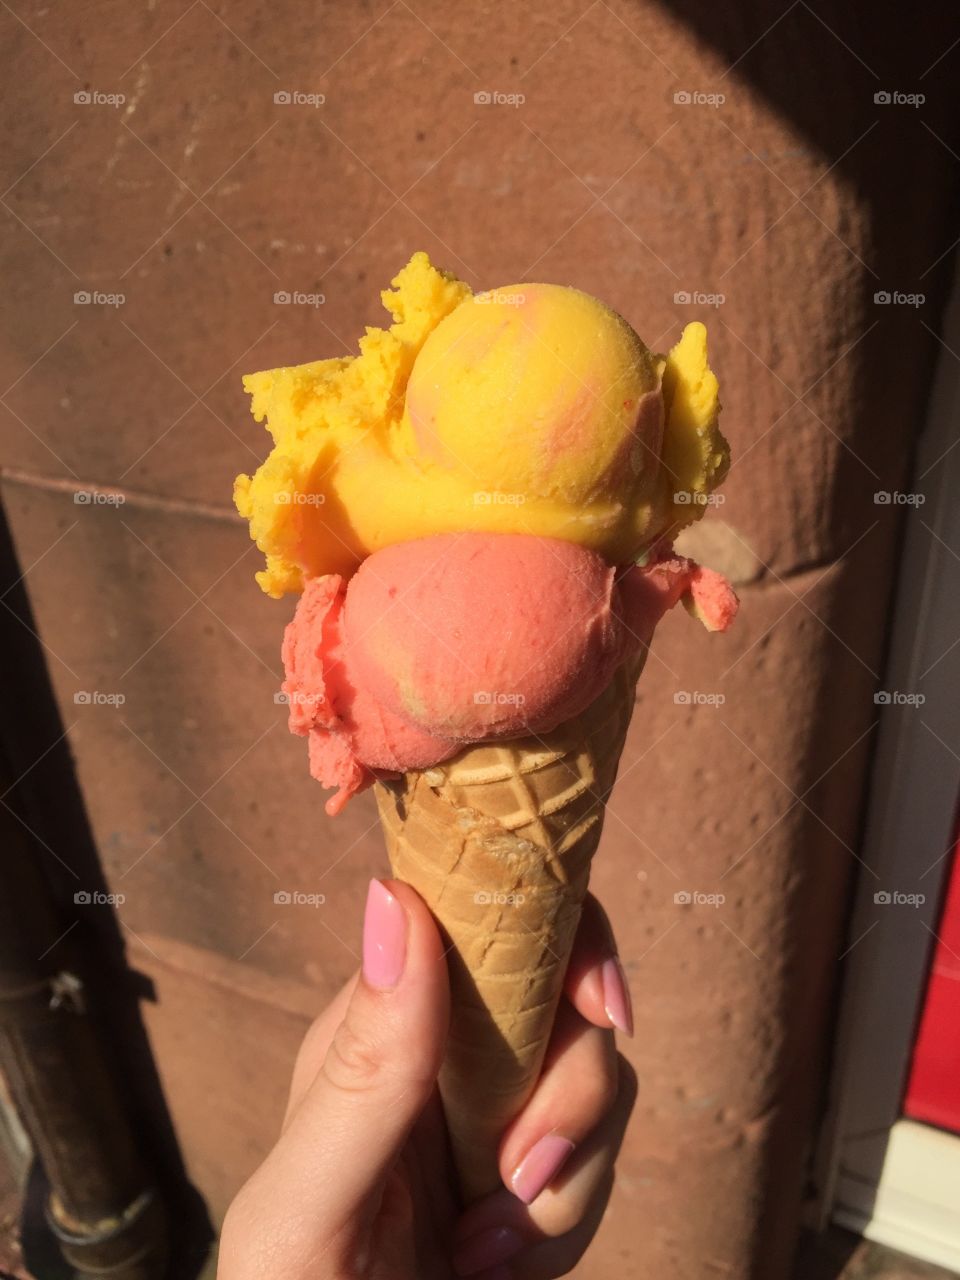 Tasty two scoop . Mango and strawberry ice cream makes a great treat on those hot summer days when your feeling like a refreshing dessert 